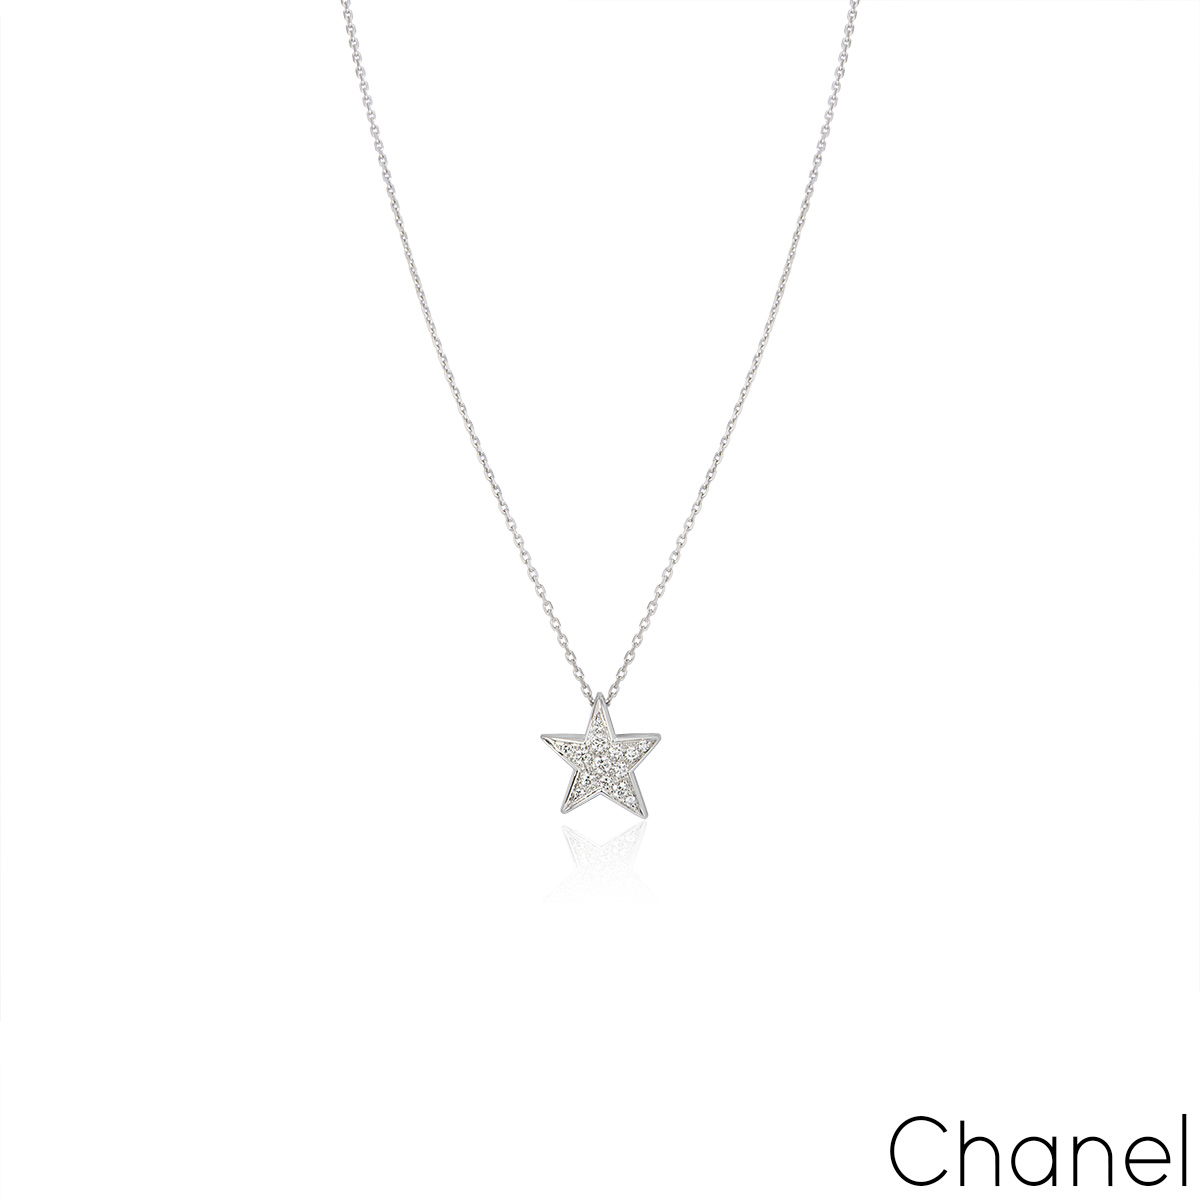 Chanel White Gold, Ceramic And Diamond Comète Necklace Available For  Immediate Sale At Sotheby's